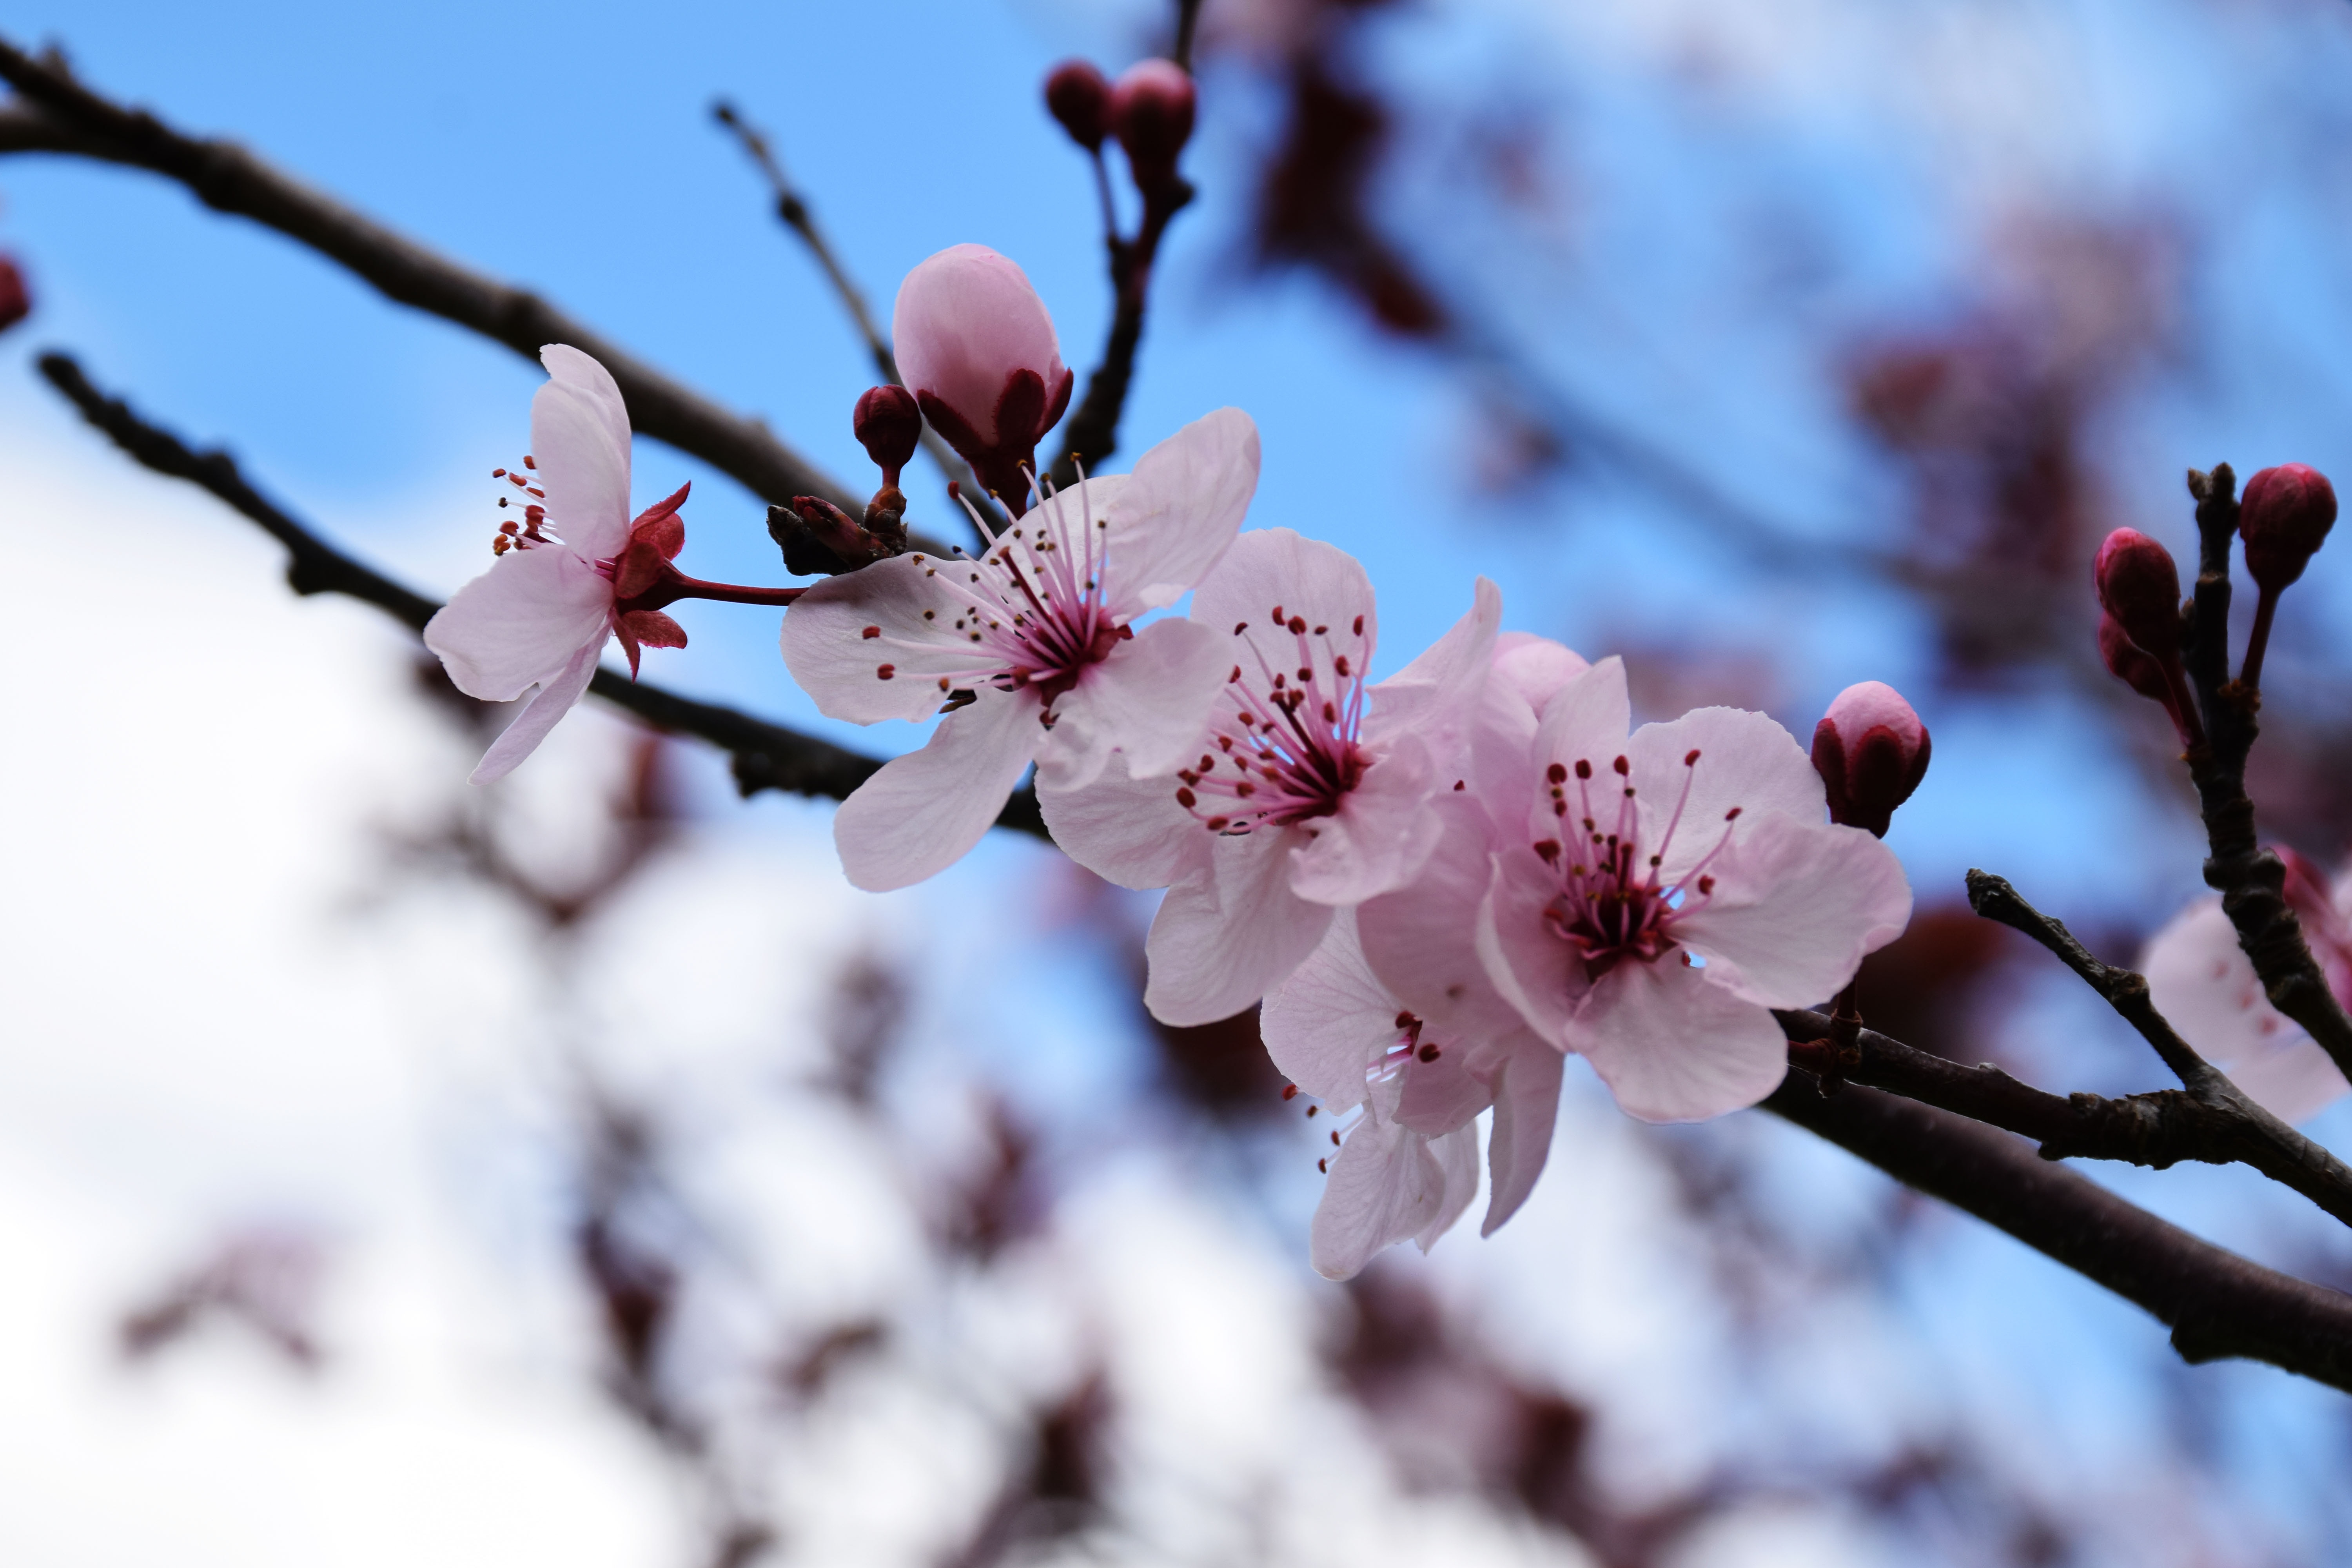 shallow focus photography of cherry blossom